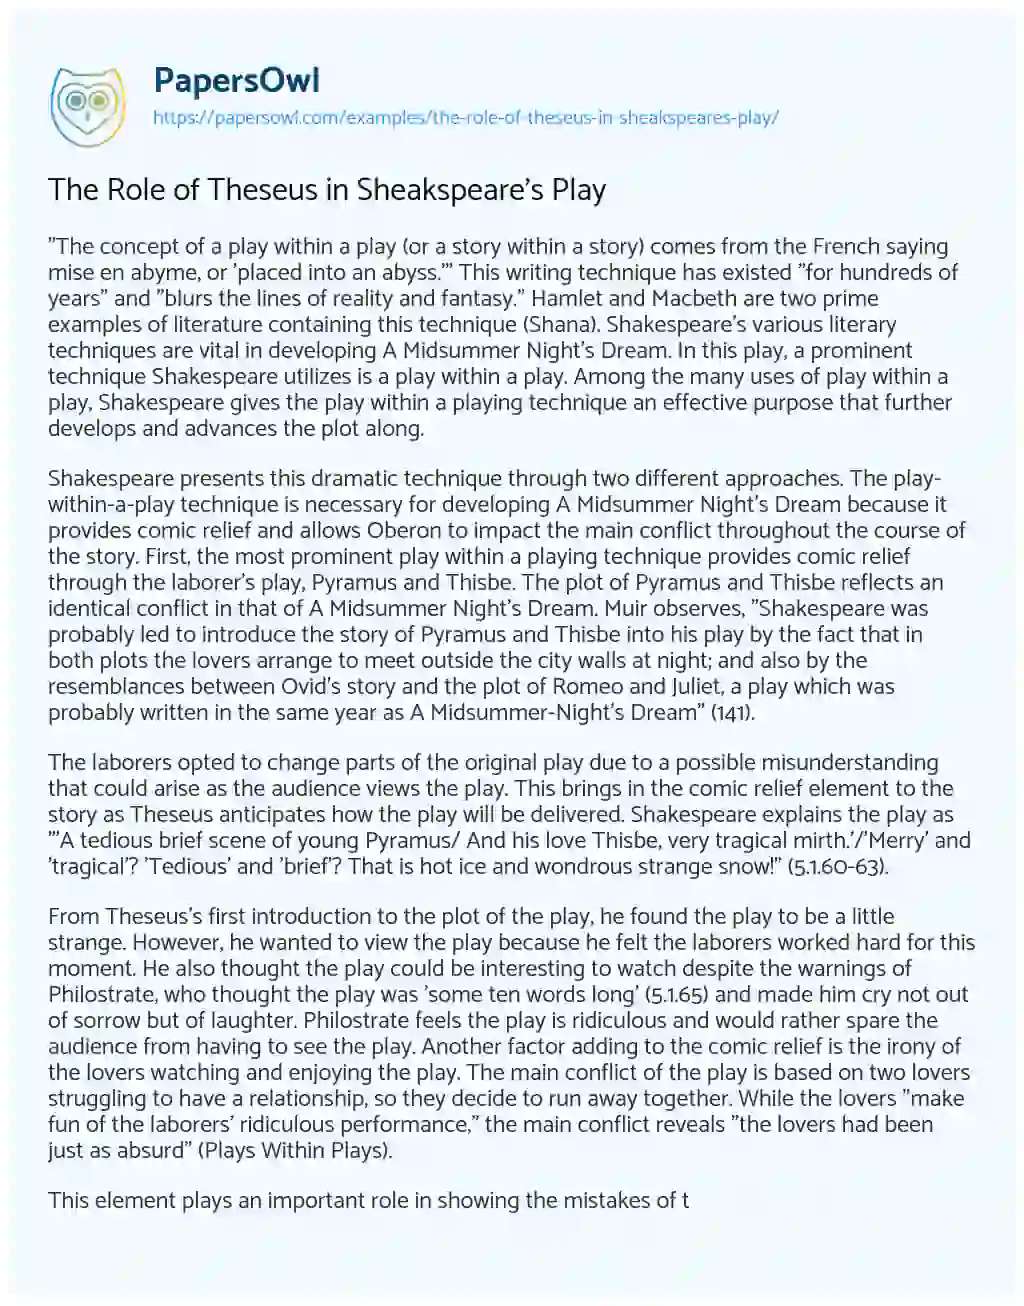 Essay on The Role of Theseus in Sheakspeare’s Play